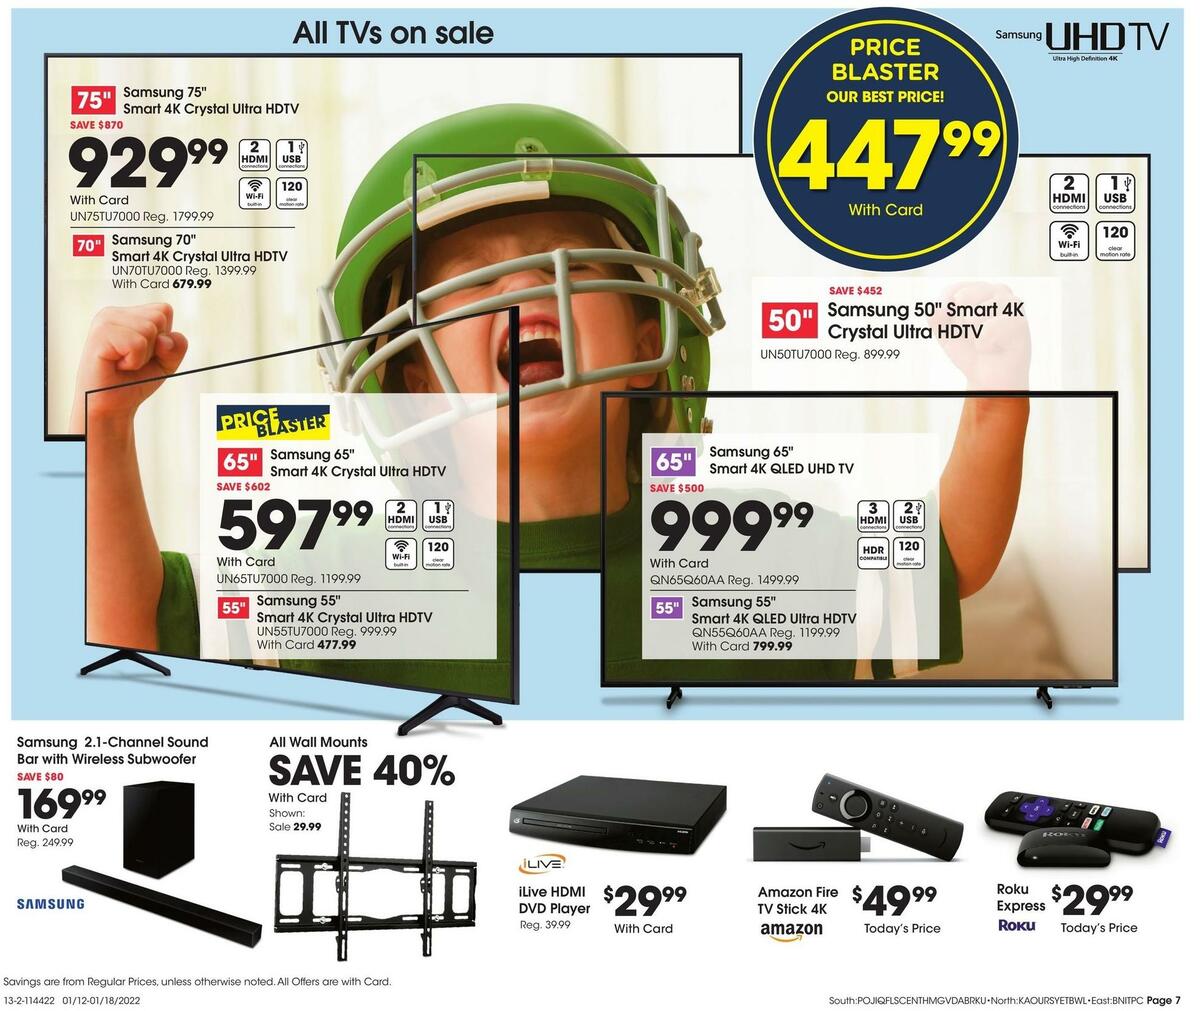 Fred Meyer General Merchandise Weekly Ad from January 12